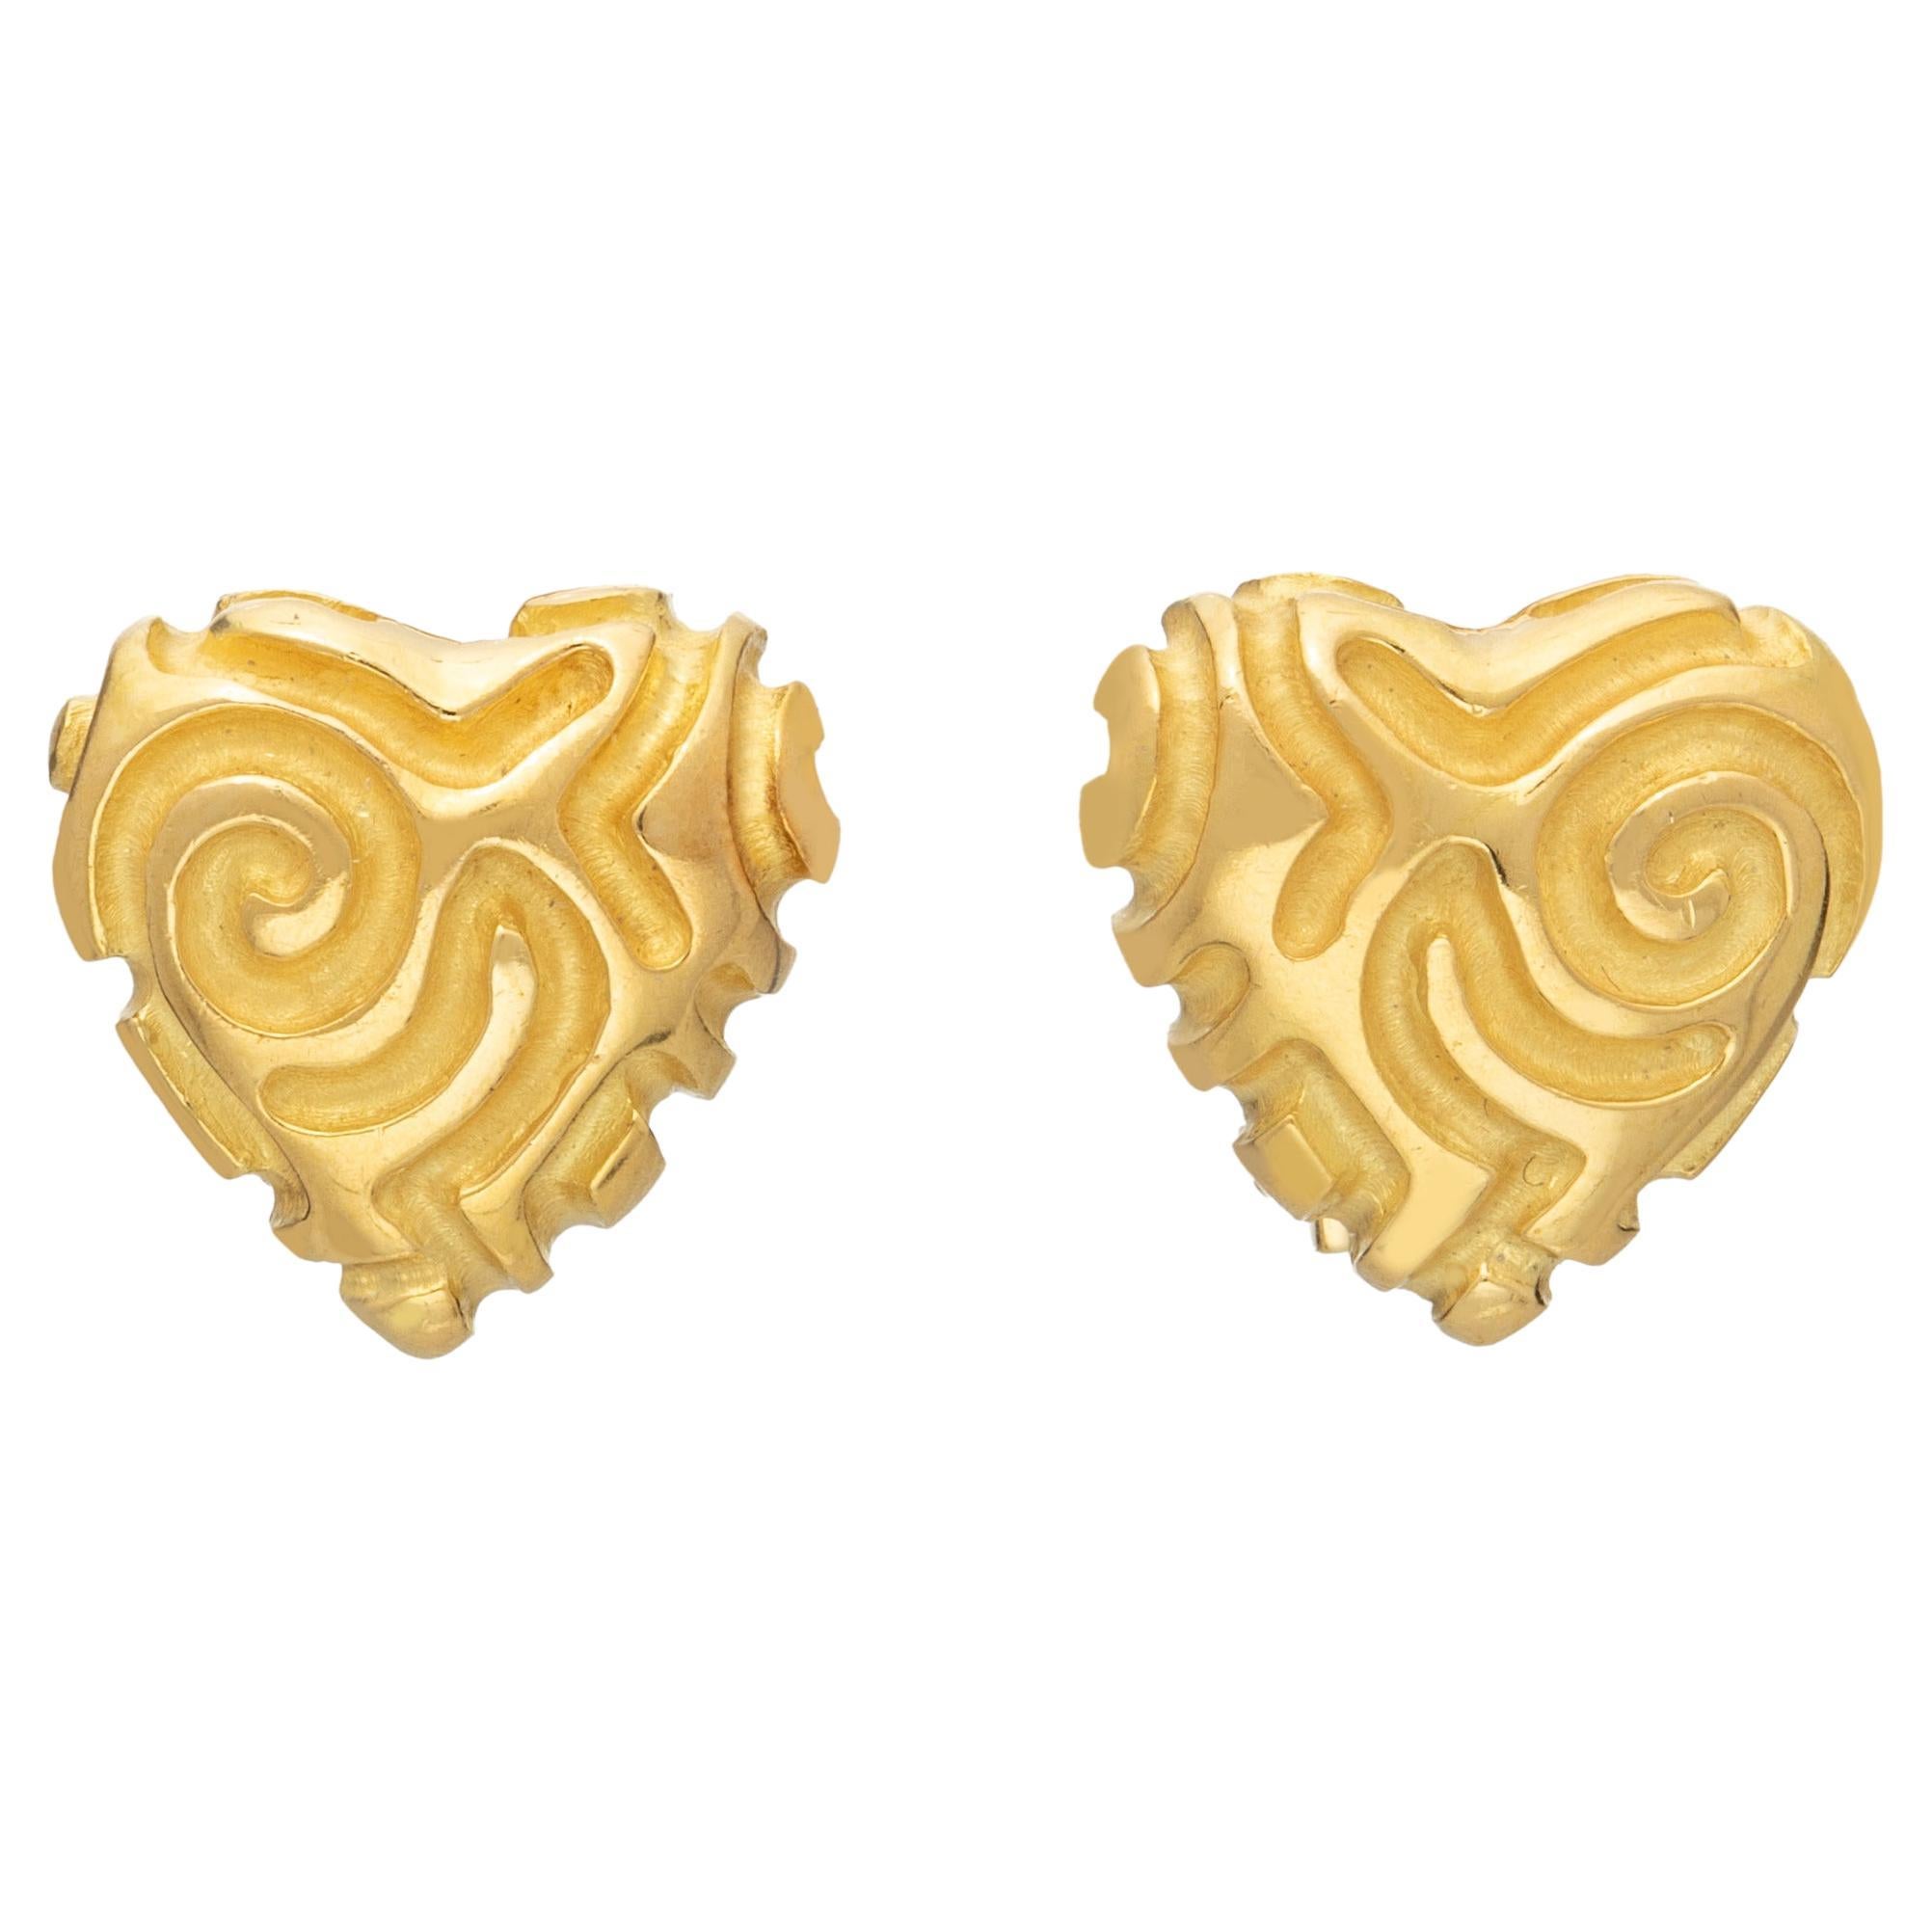 Carved Heart Earrings in 18k Gold, by Gloria Bass Design For Sale